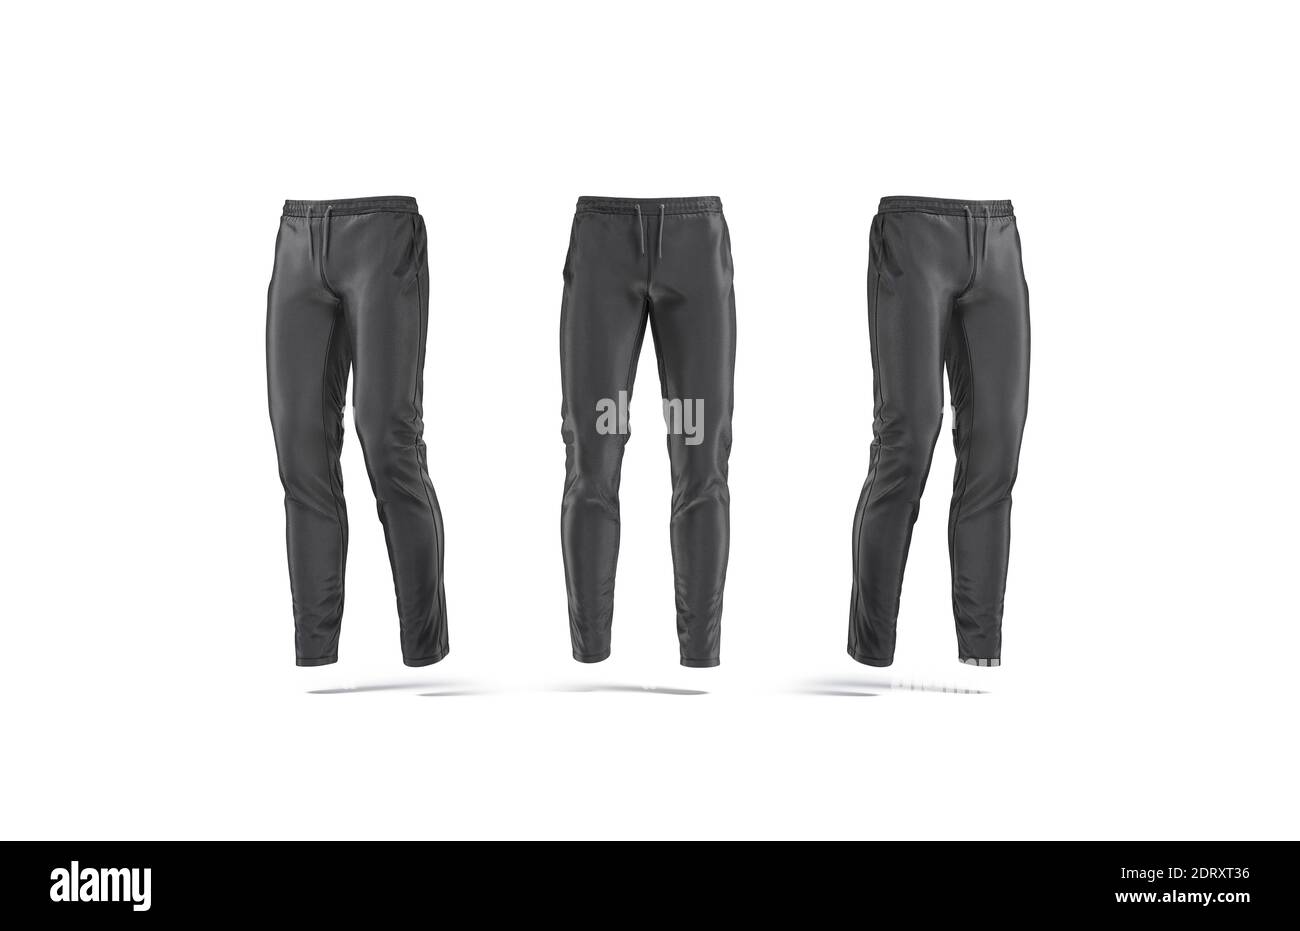 https://c8.alamy.com/comp/2DRXT36/blank-black-sport-pants-mock-up-front-and-side-view-3d-rendering-empty-sporty-training-sweatpants-mockup-isolated-clear-cloth-joggers-or-tracky-d-2DRXT36.jpg